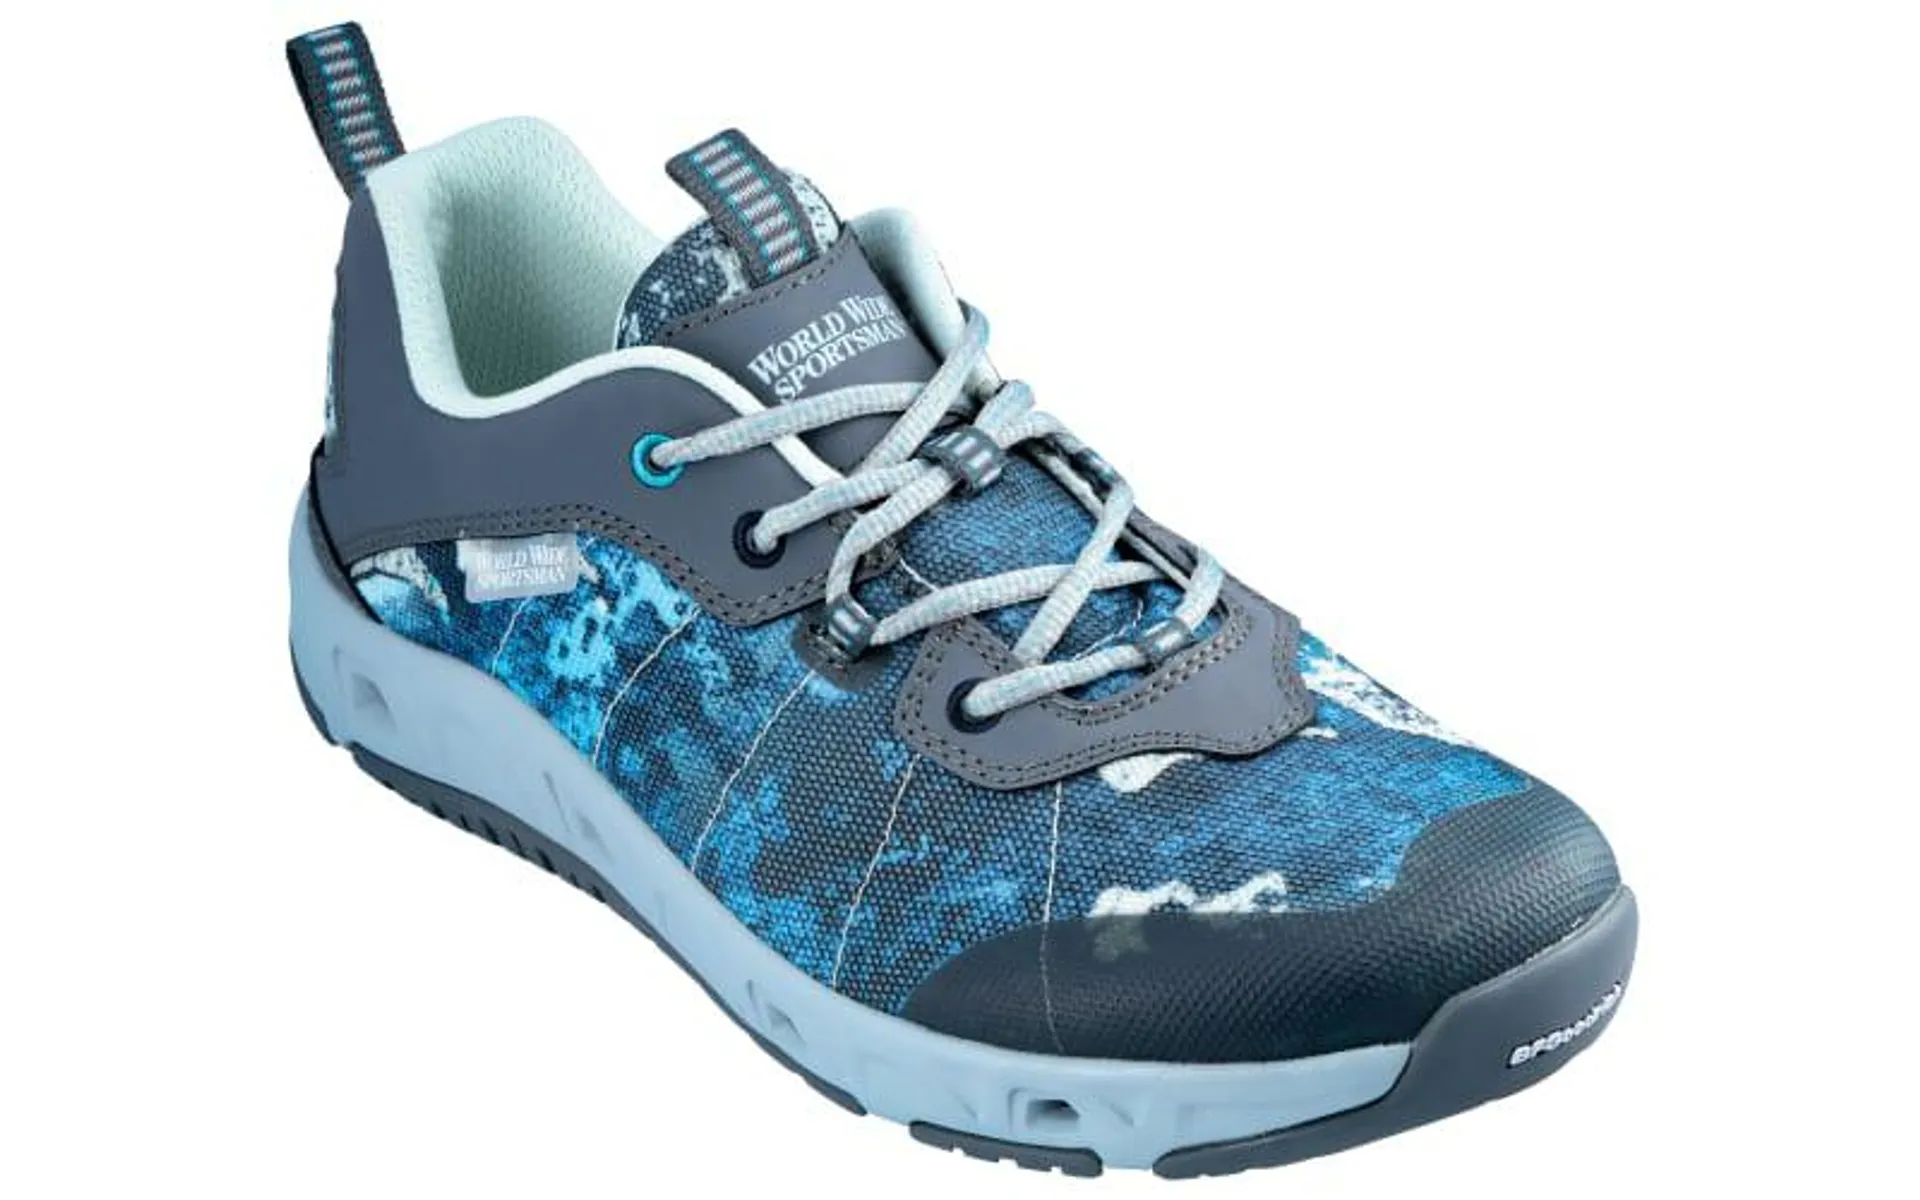 World Wide Sportsman Grip Current Fishing Shoes for Men